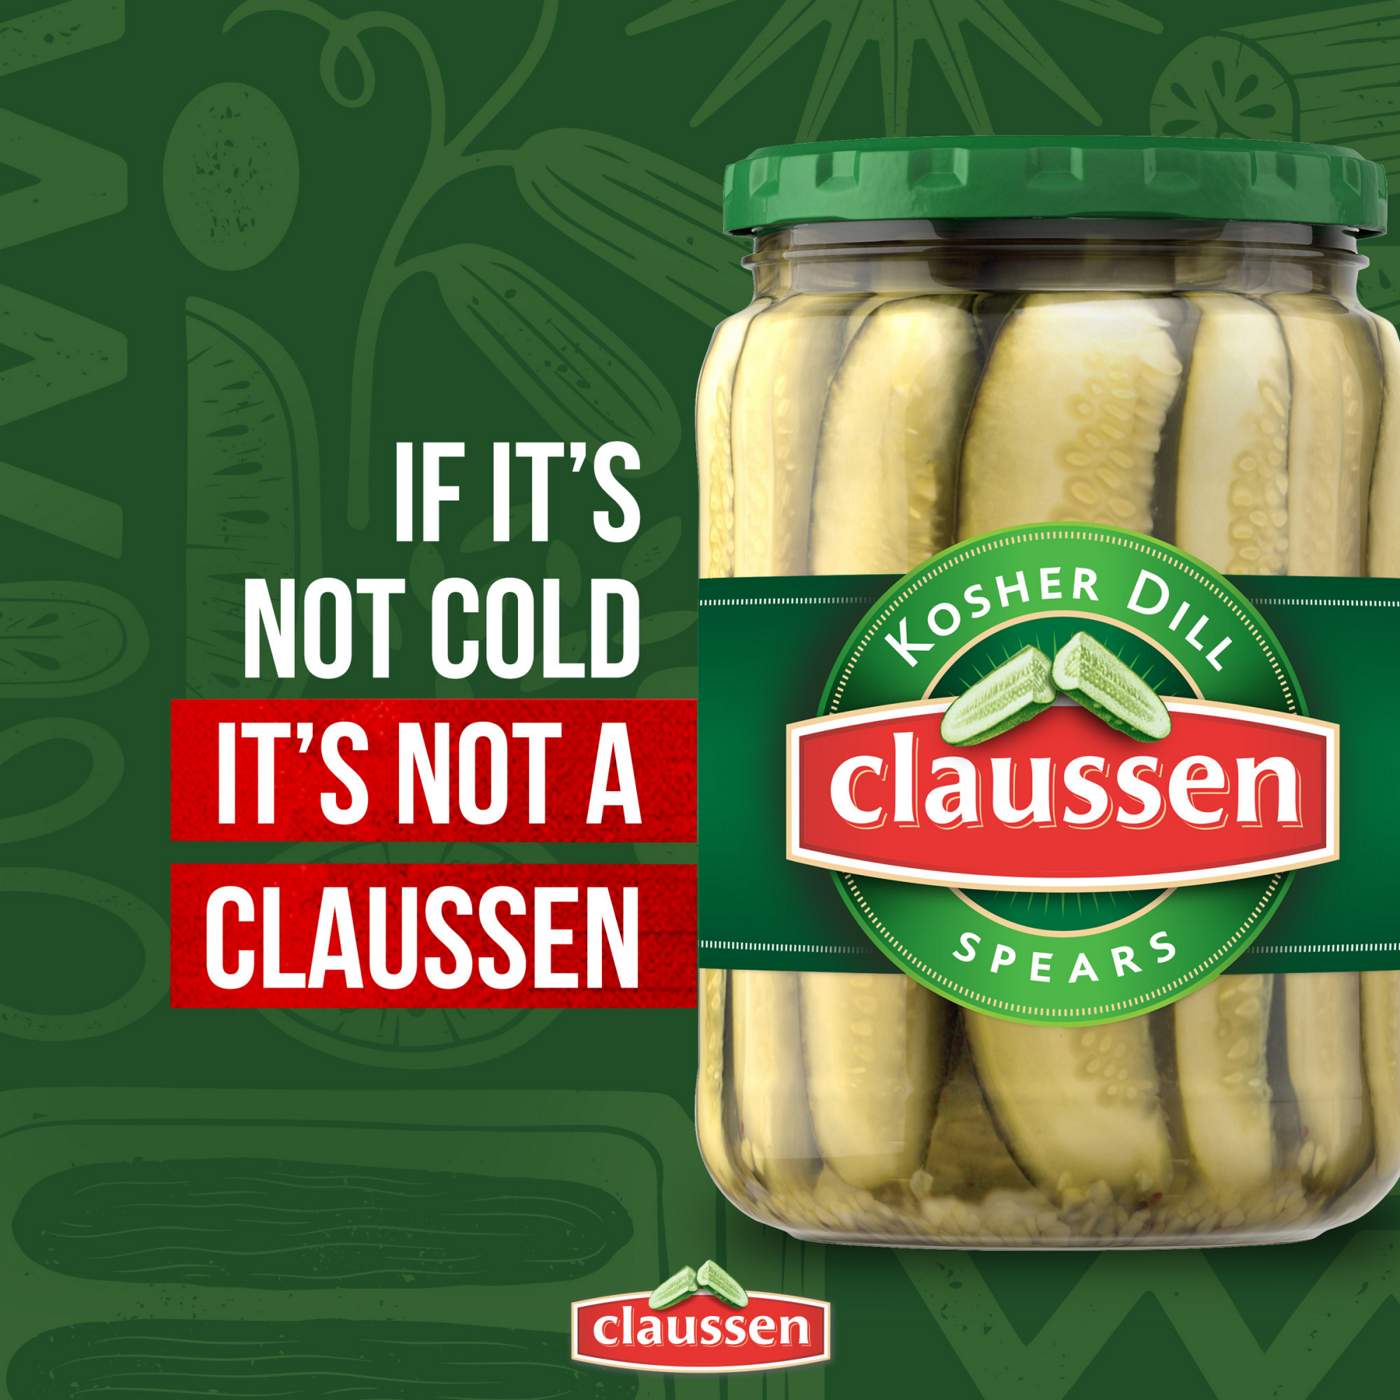 Claussen Kosher Dill Spears; image 5 of 9